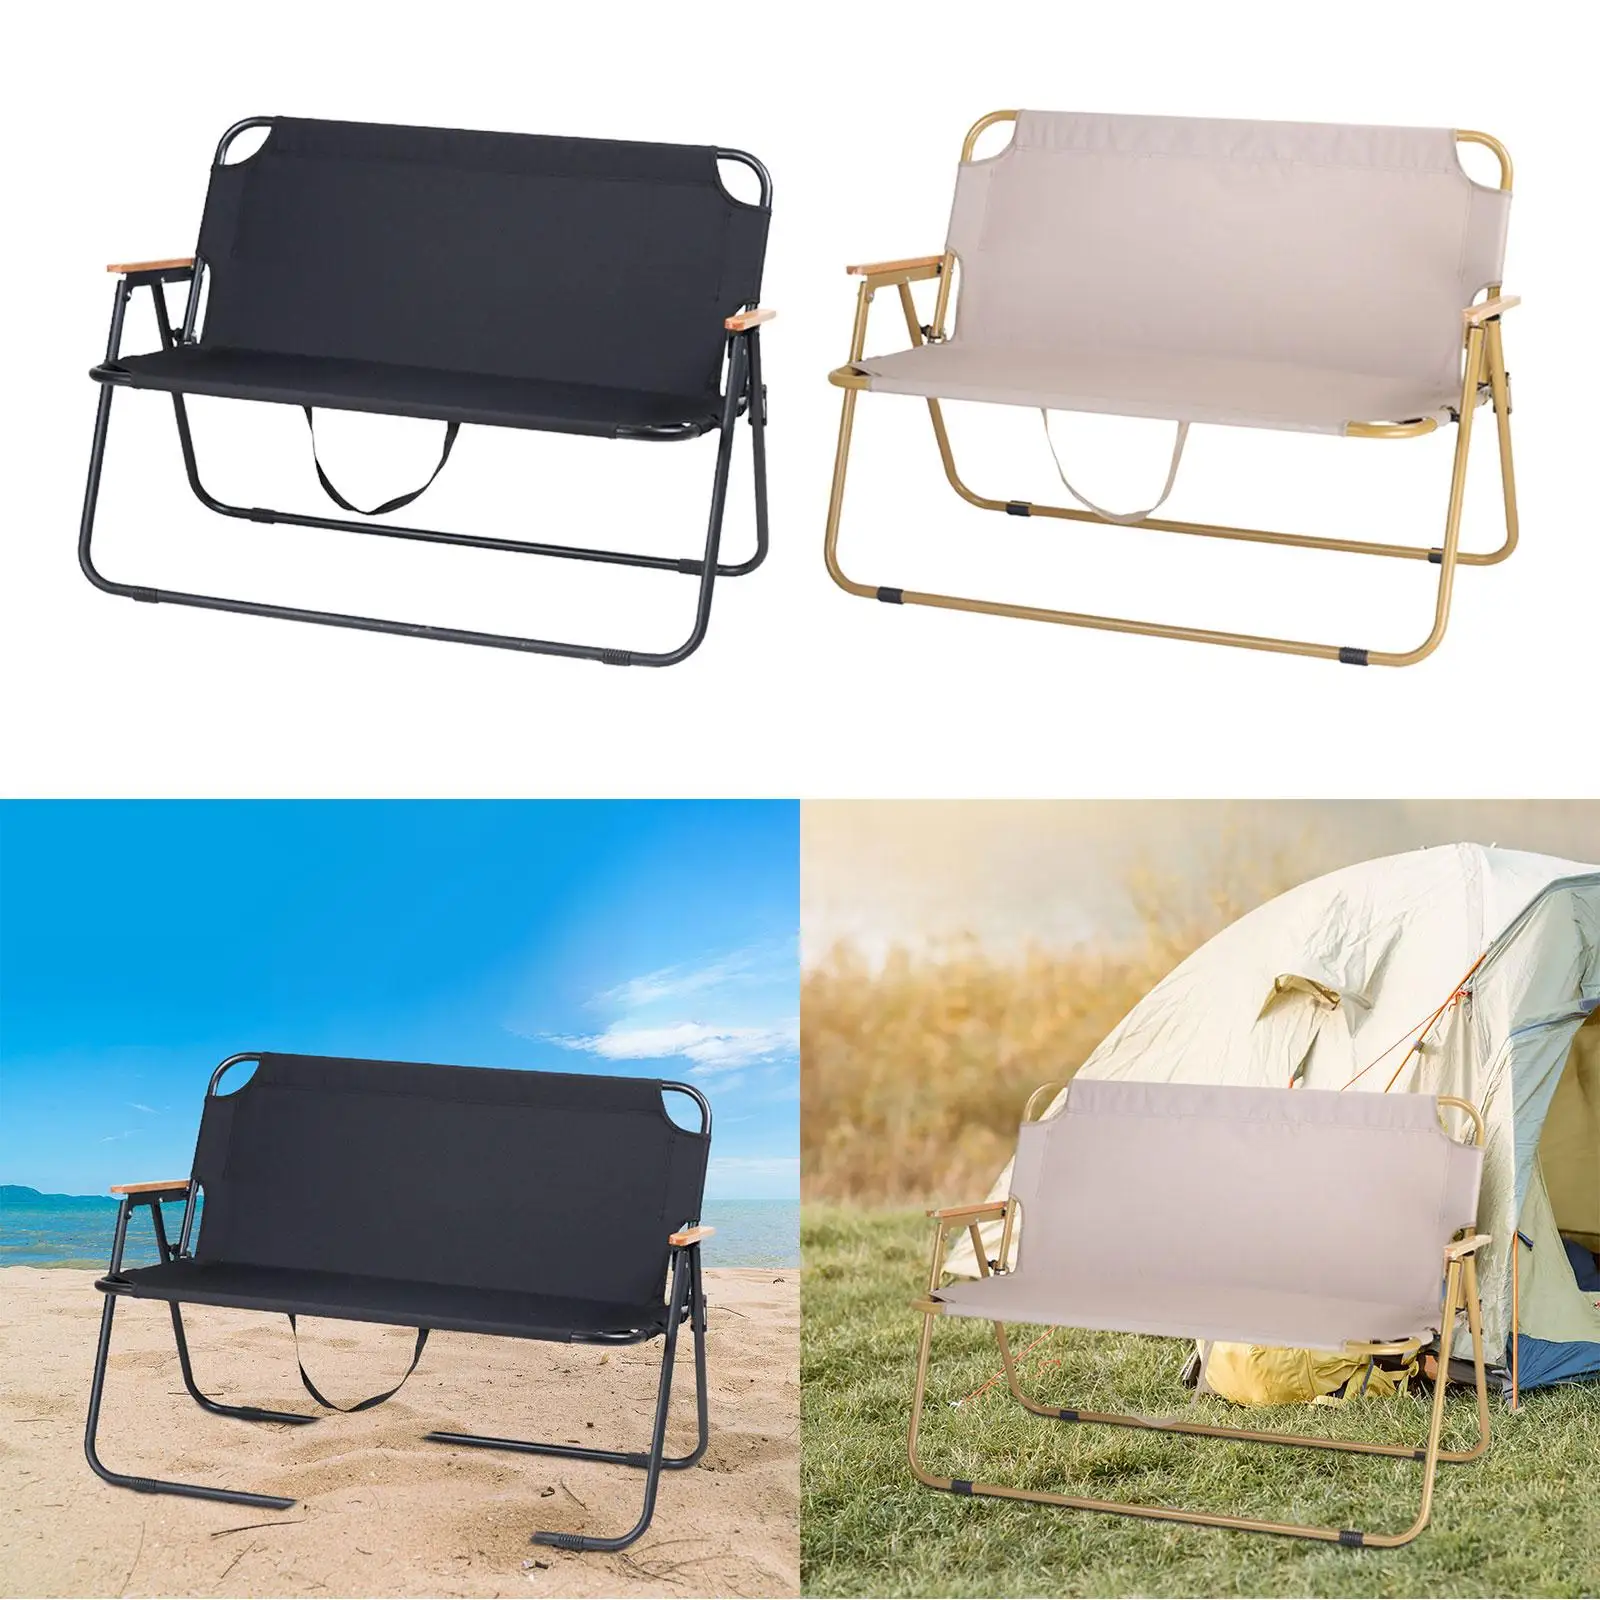 Folding Camping Chair Hiking Traveling Outside Camping Seat Outdoor Armchair